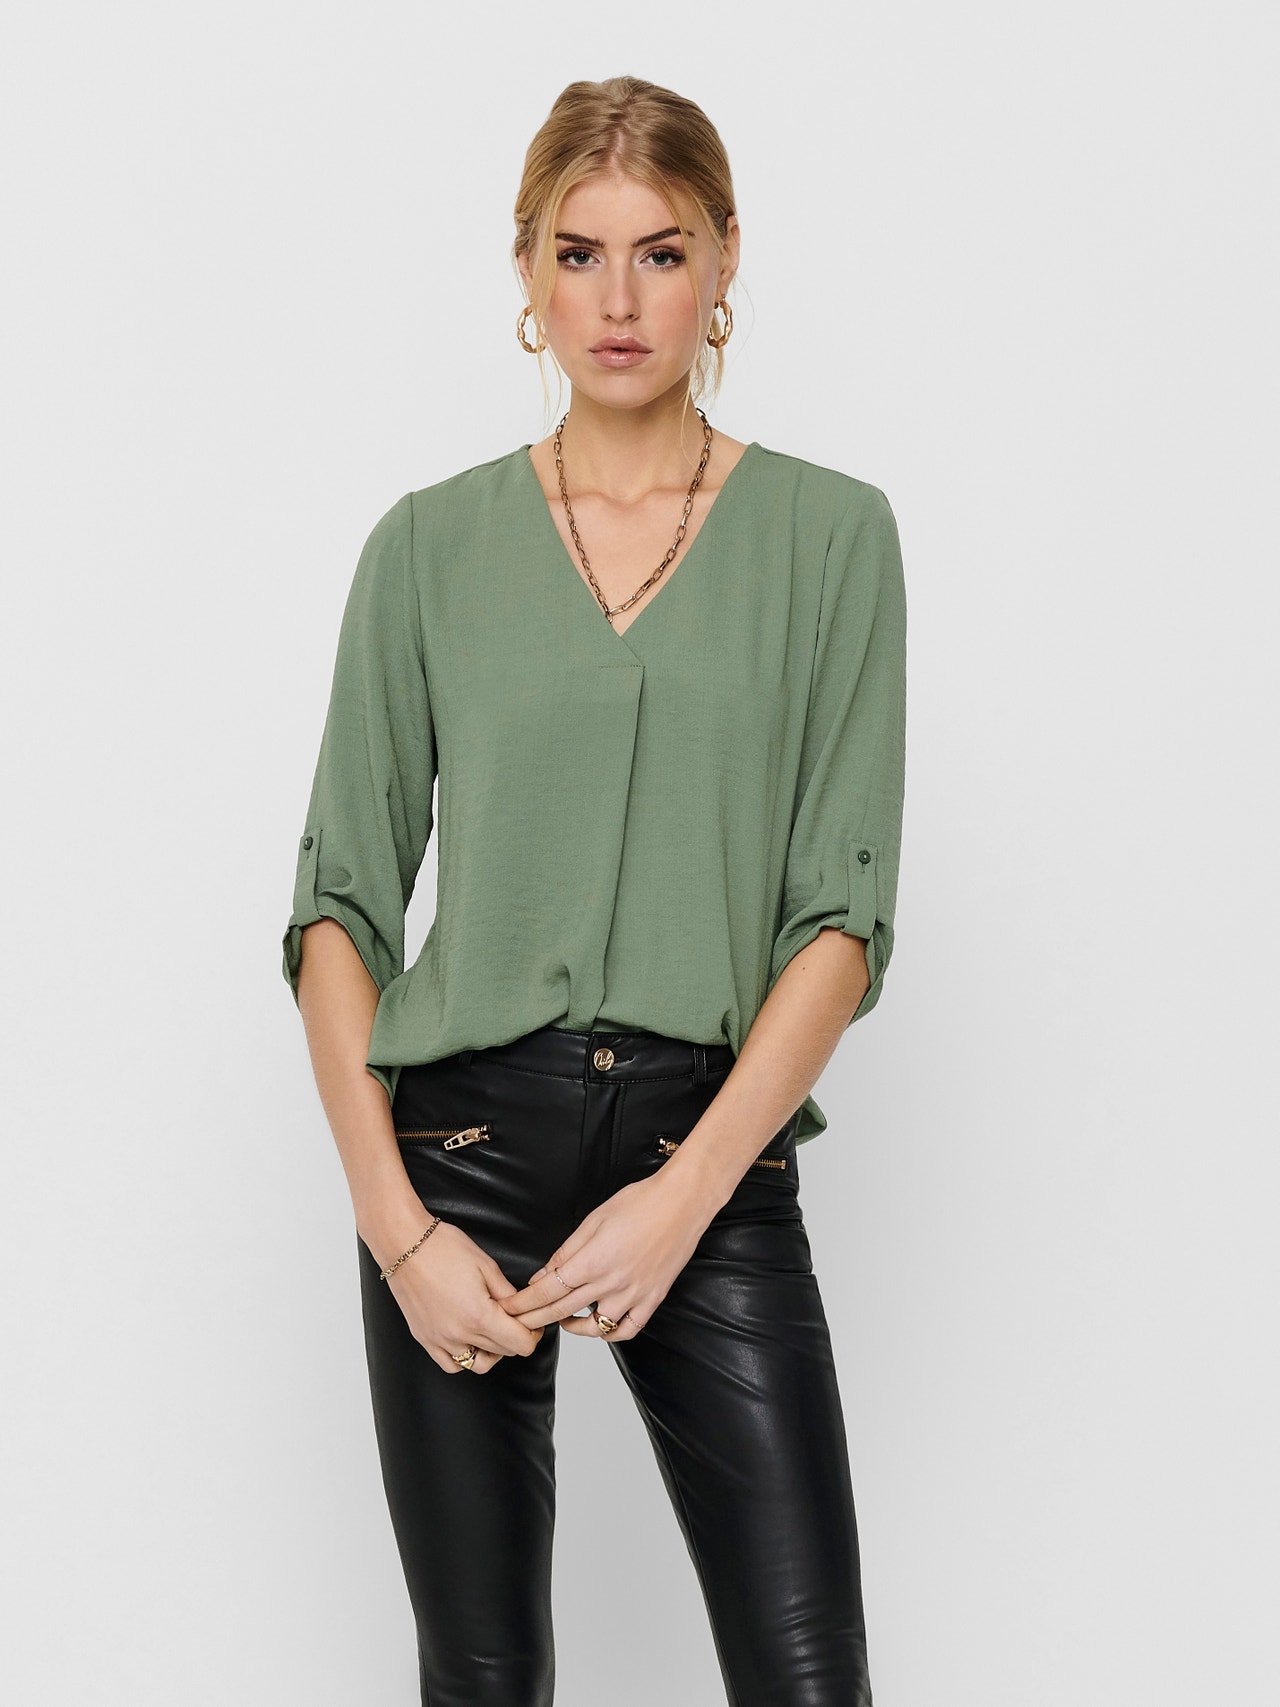 ONLY Loose Fit V-Neck Fold-up cuffs Volume sleeves Top -Sea Spray - 15226911